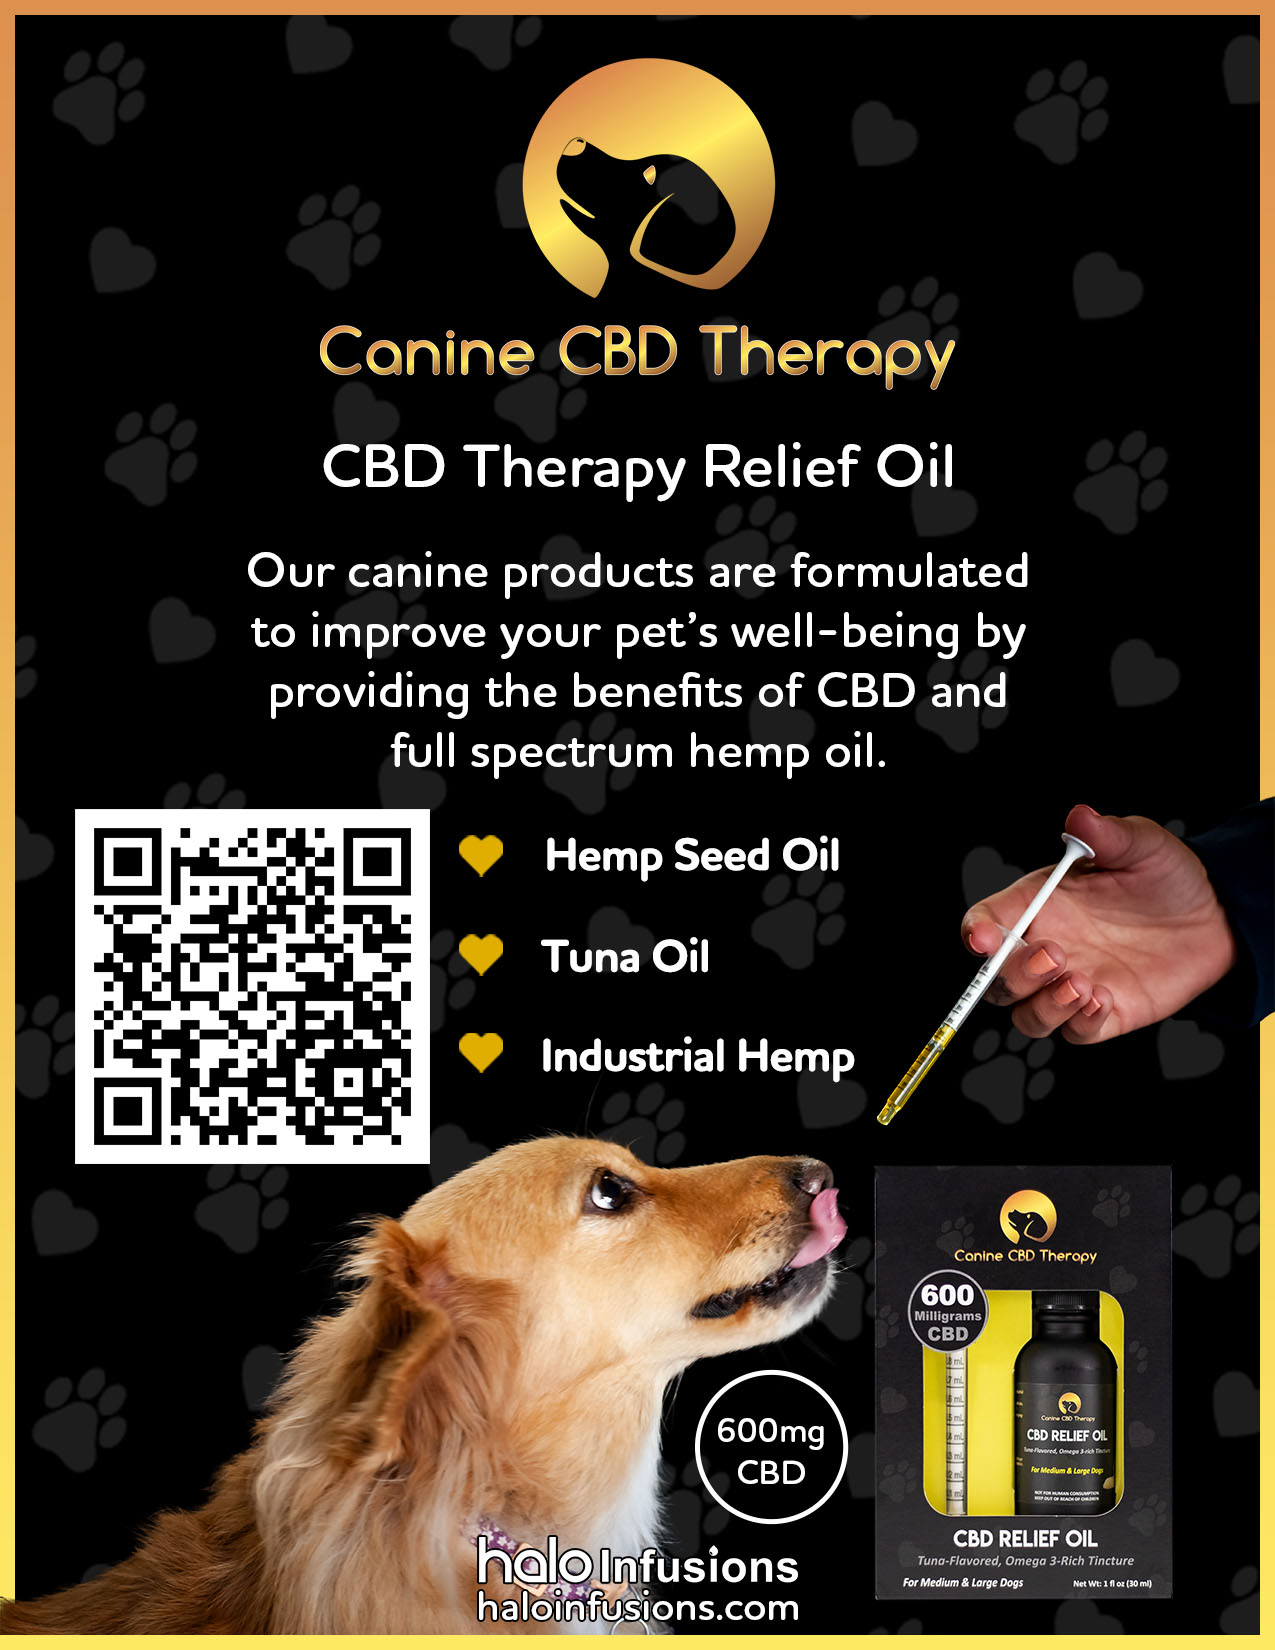 Canine CBD Therapy Relief Oil, 600mg CBD, canine product, Halo Infusions